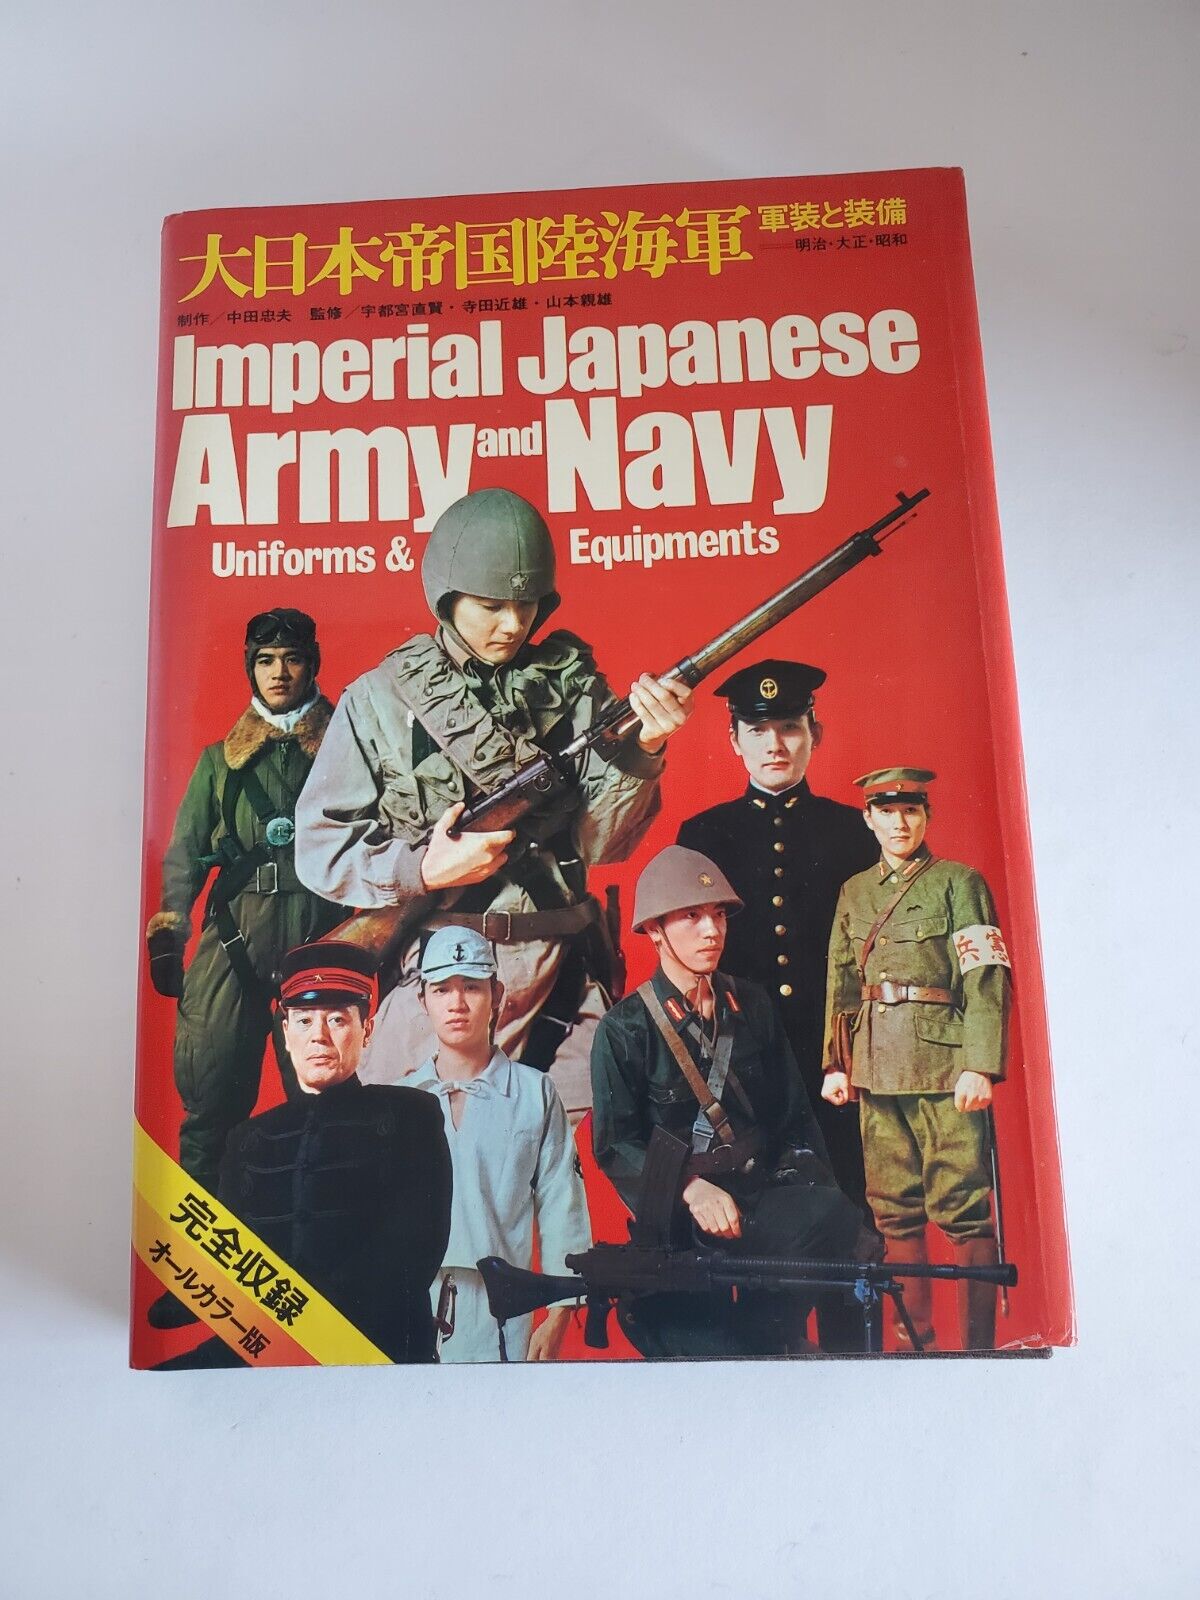 IMPERIAL JAPANESE ARMY & NAVY UNIFORMS & EQUIPMENT REFERENCE BOOK